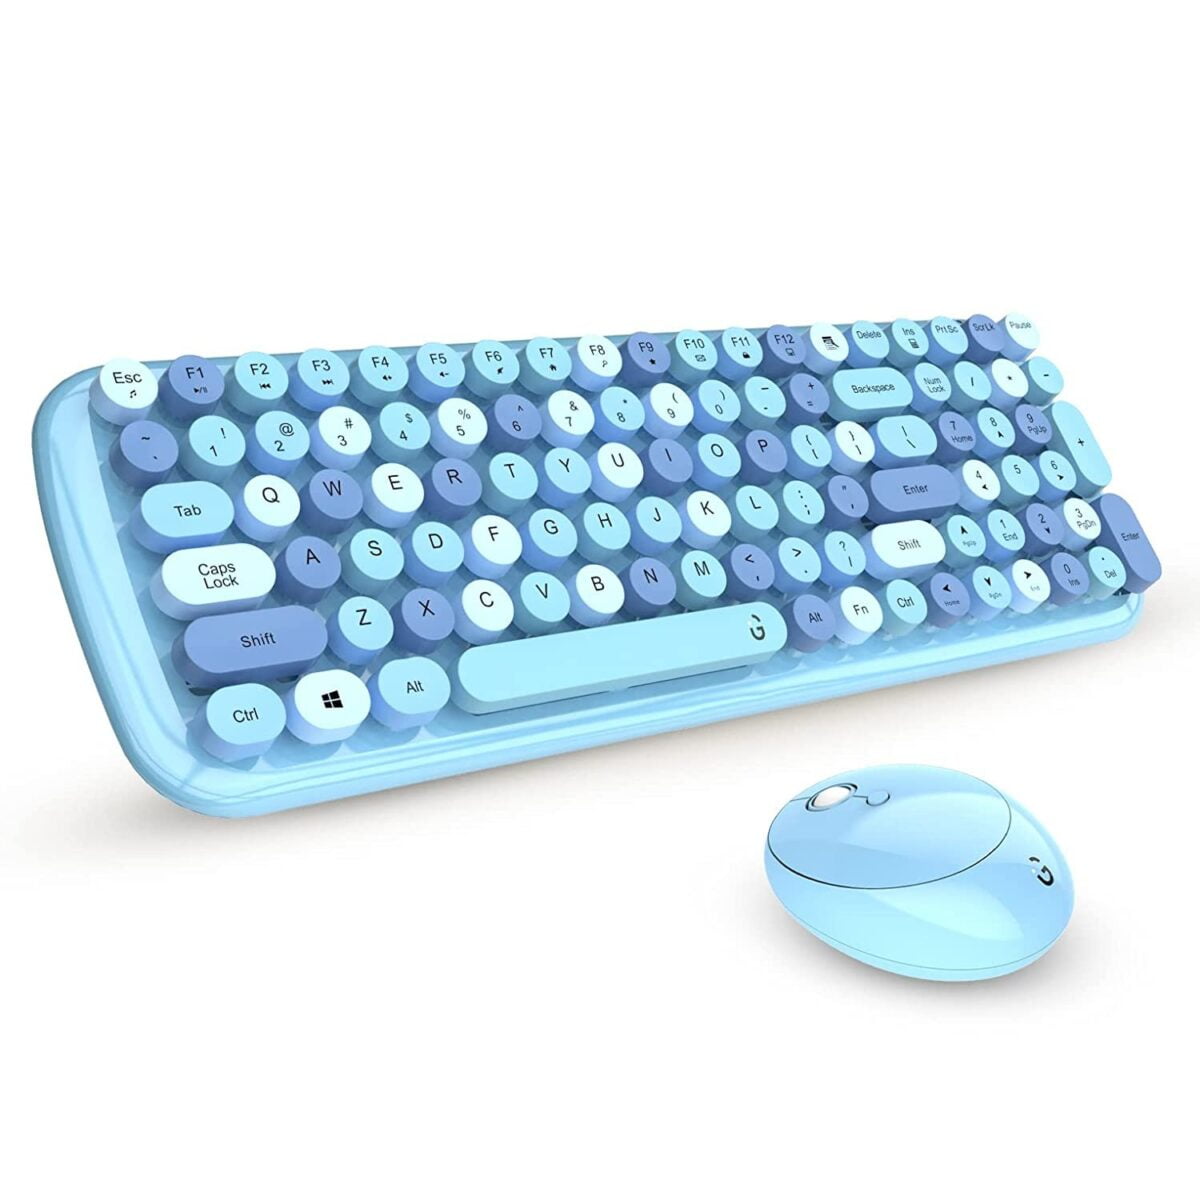 I gear keybee retro typewriter inspired 2. 4ghz wireless keyboard and mouse combo 7 wireless keyboard and mouse